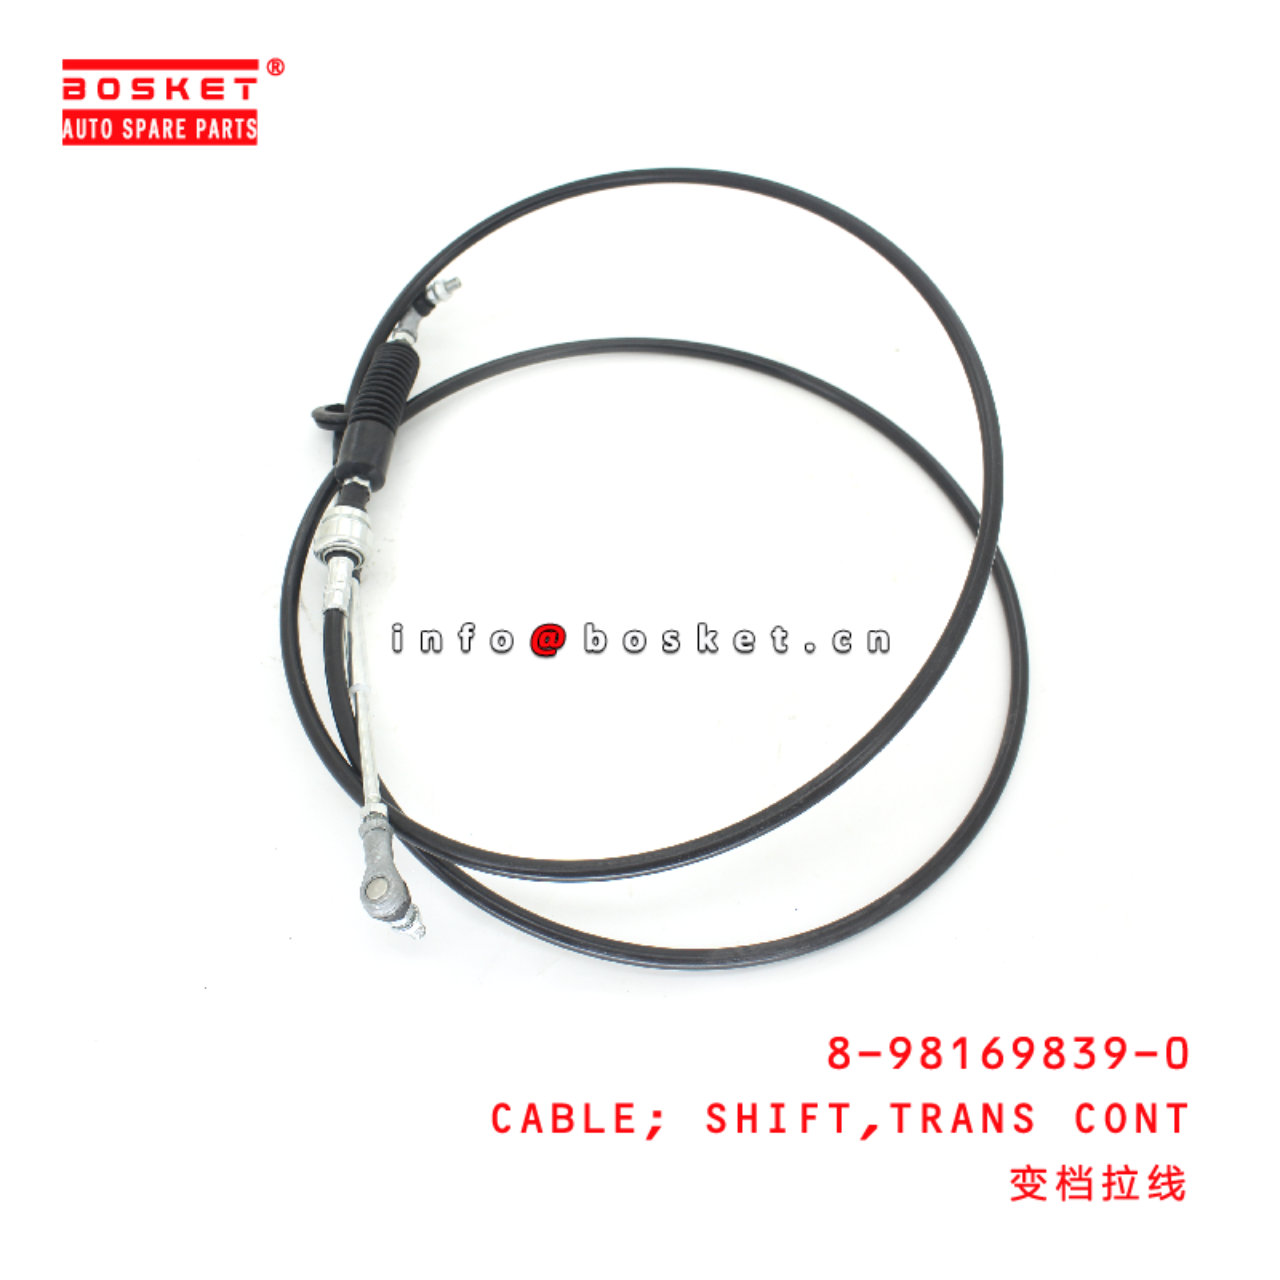 8-98169839-0 TRANSMISSION CONTROL SHIFT CABLE suitable for ISUZU   8981698390